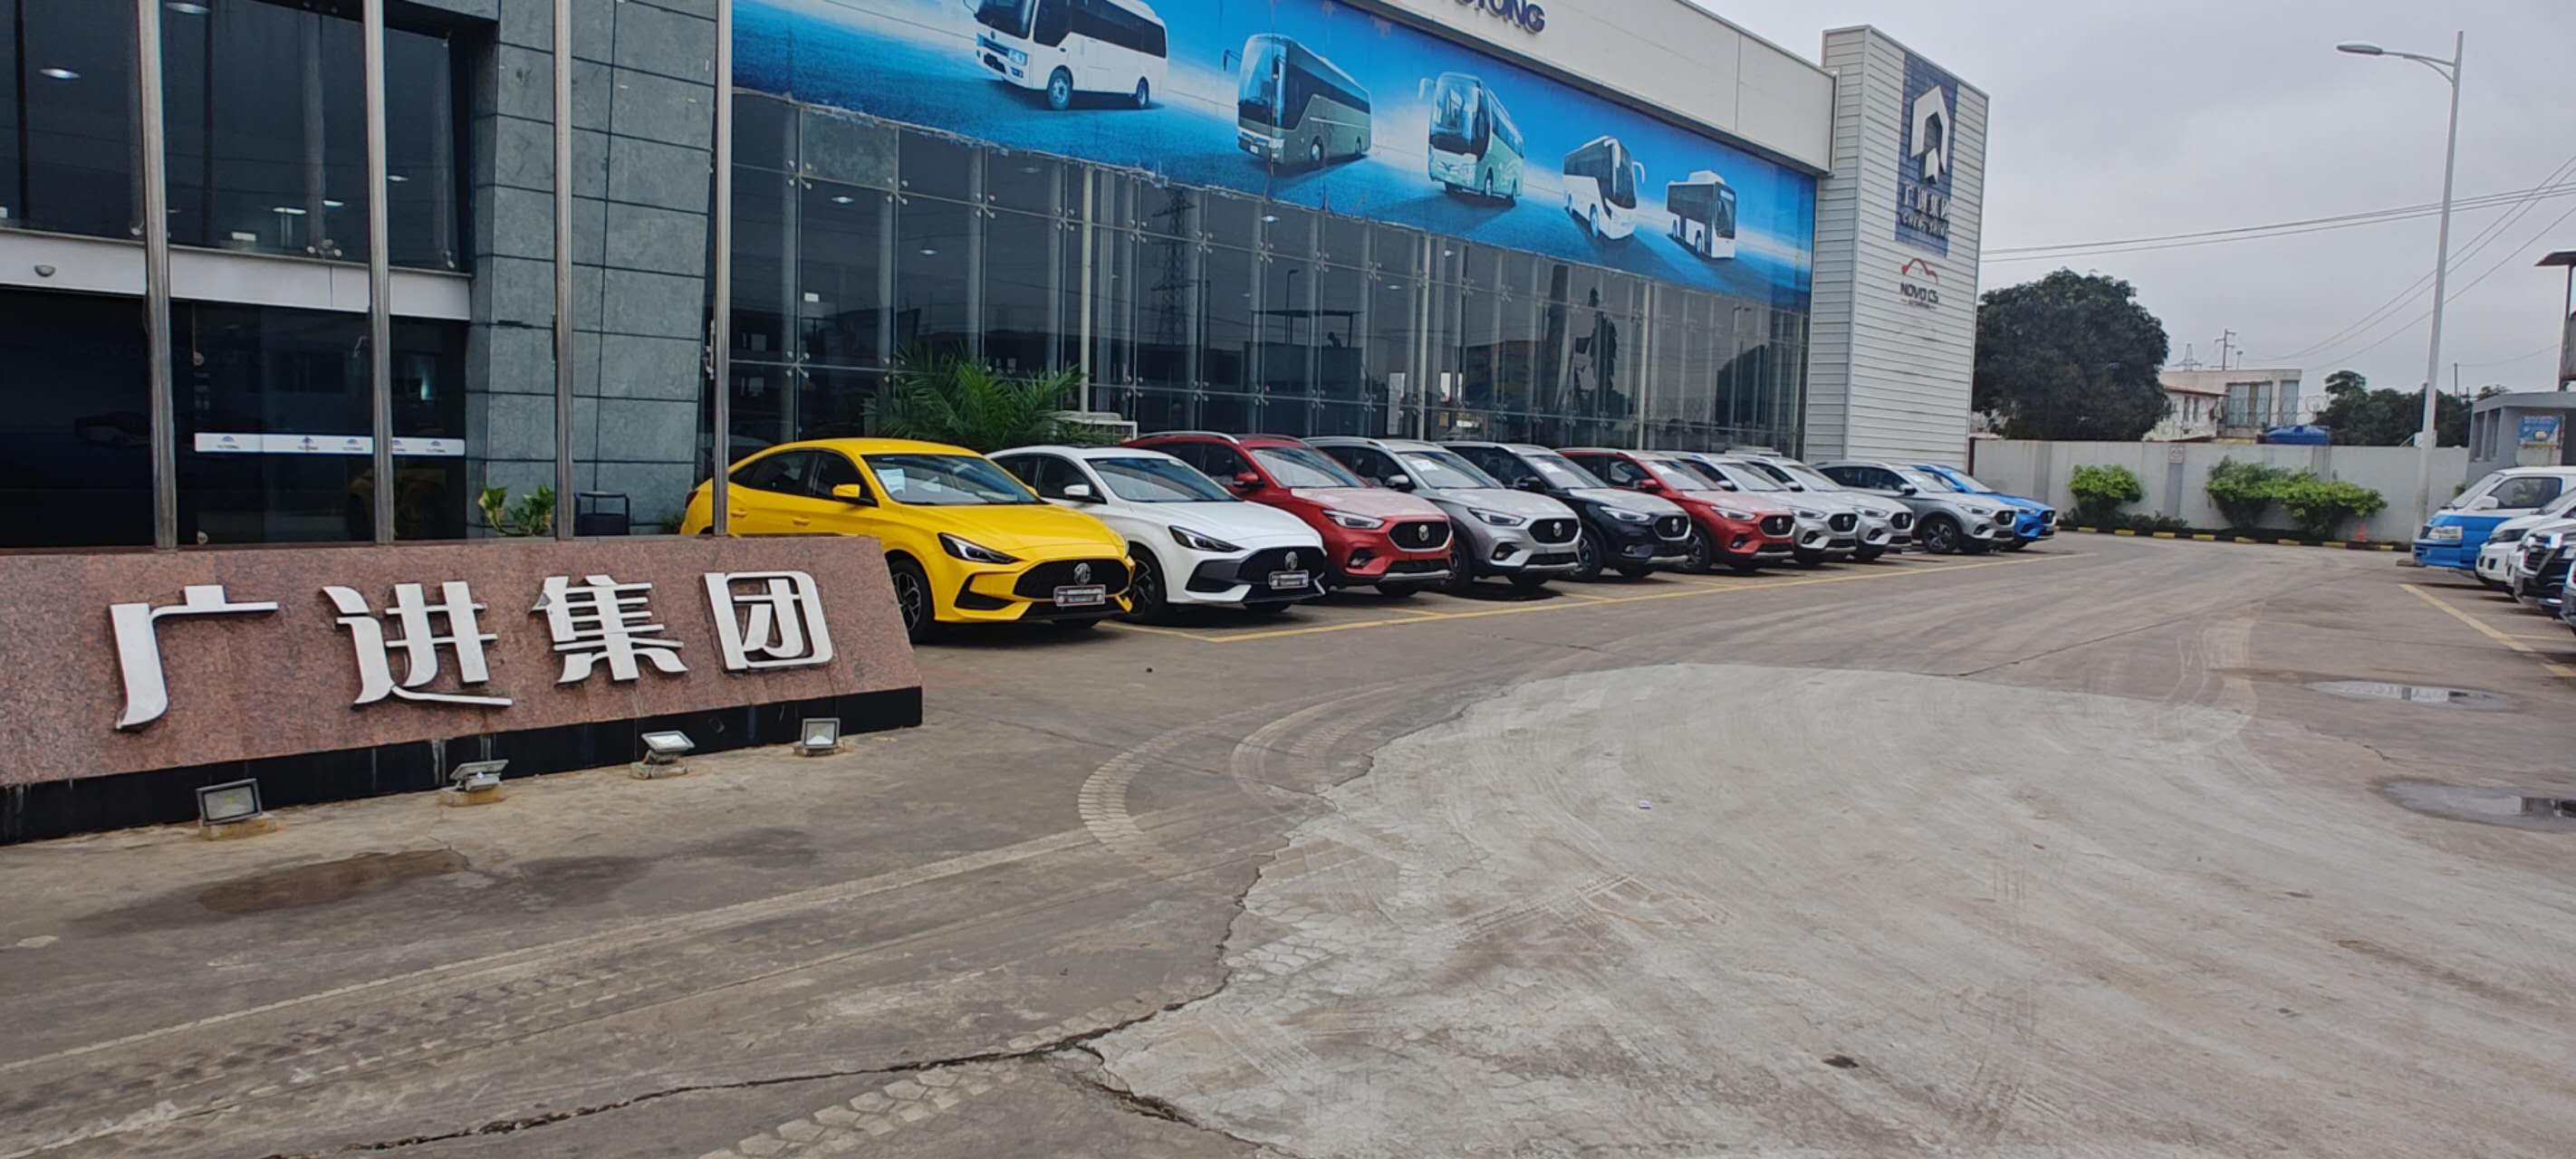 Shining on the scene, grabbing the C-suite | Guangjin Angola Trading Company launches new vehicle exhibition and sales initiative